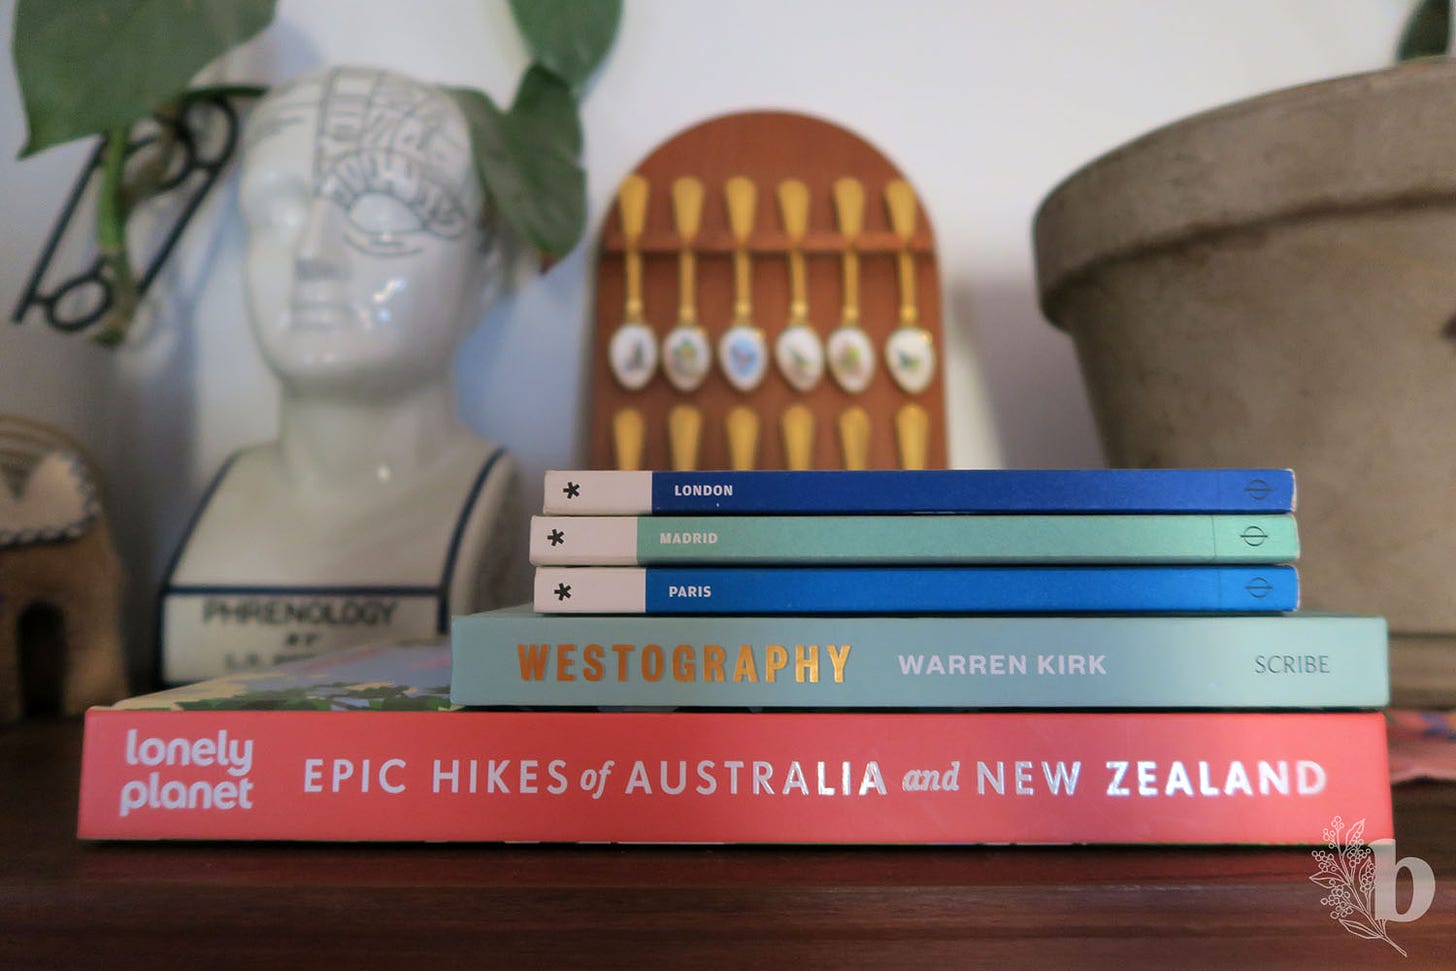 A pile of travel books